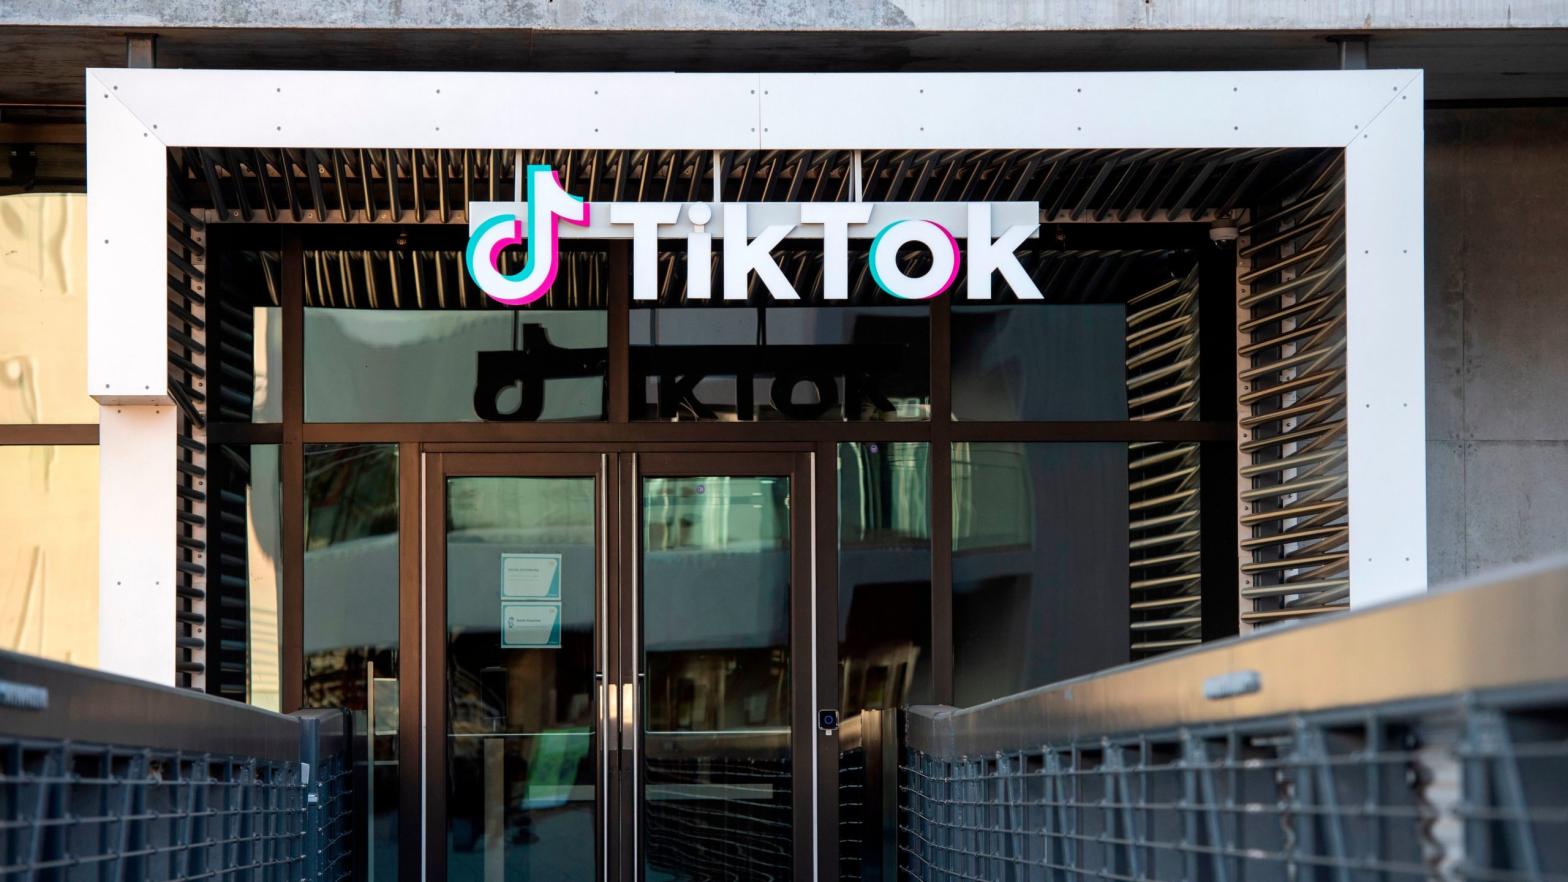 File photo of the TikTok building in Culver City, California. (Photo: Valerie Macon, Getty Images)